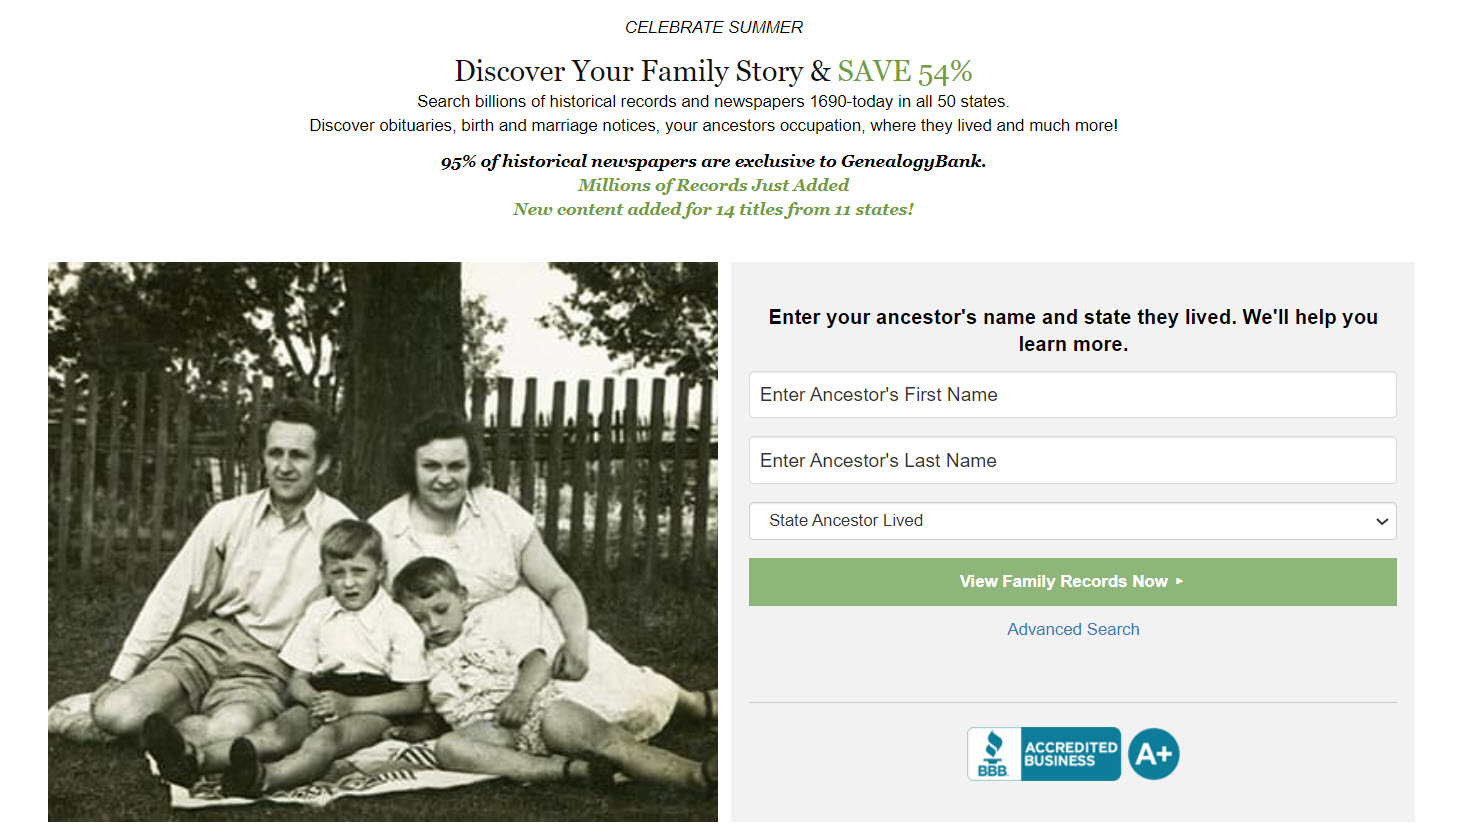 SUMMERTIME and the genealogy is EASIER with GenealogyBank! Discover Your Family Story thru historical newspapers & save up to 58%! ENDS SOON! https://genealogybargains.com/gb-summer #ad #genealogy #newspapers #summer #Summer2023 #coupons #promocodes